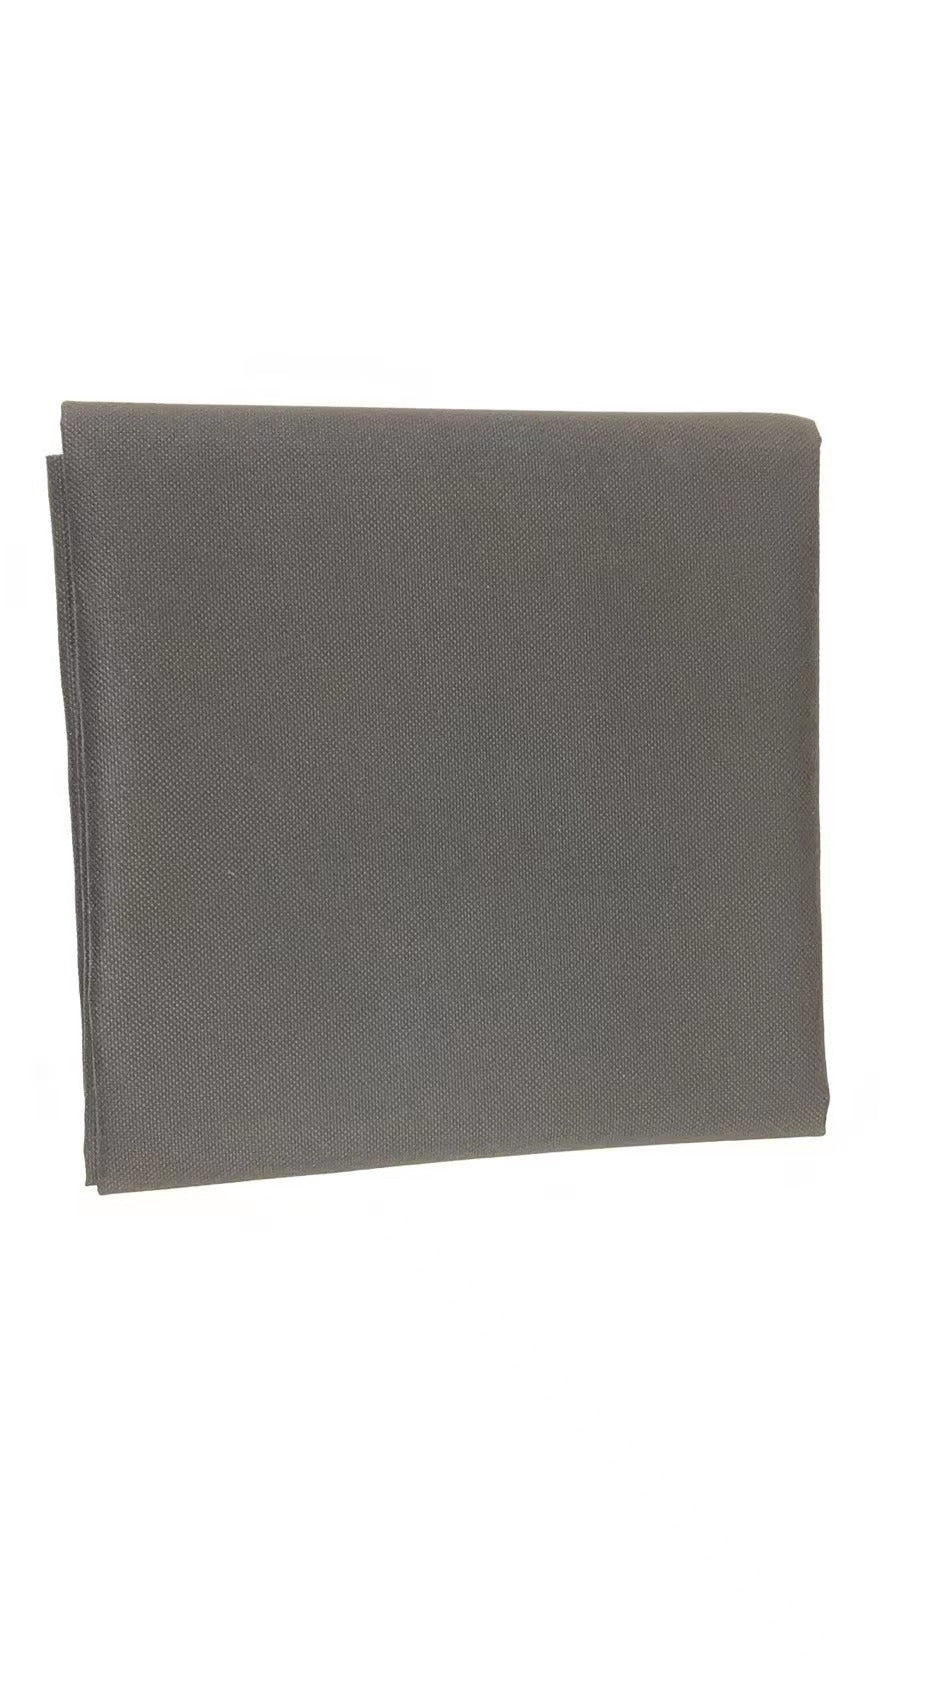 Upholstery Cambric (Dust Cover) Heavy Duty 3.50 Oz. = 100 G., 39.5" Wide Black Color